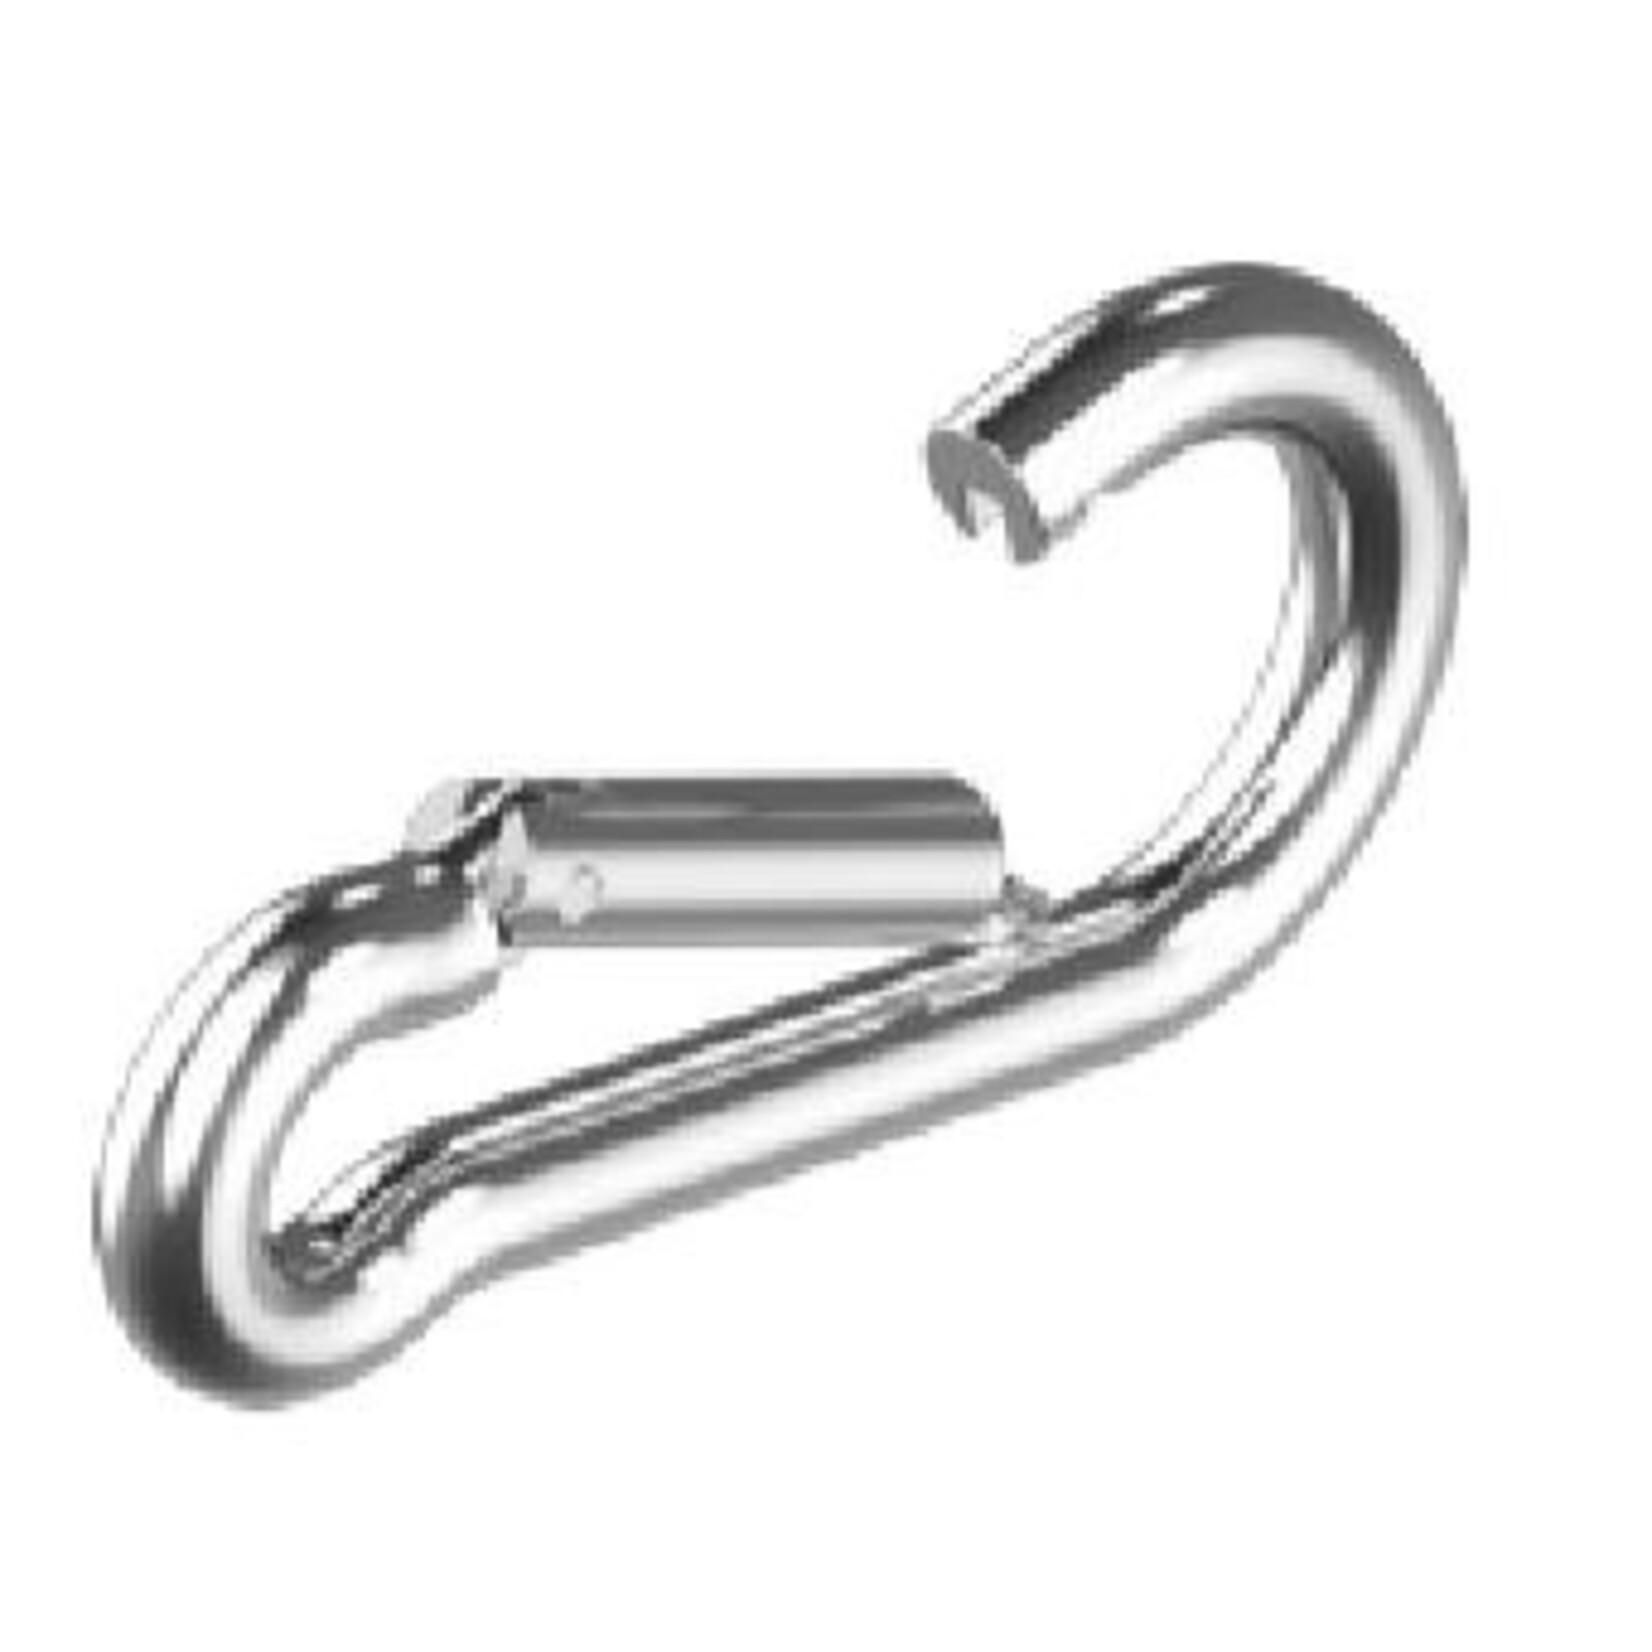 Snap hook stainless 5x50mm